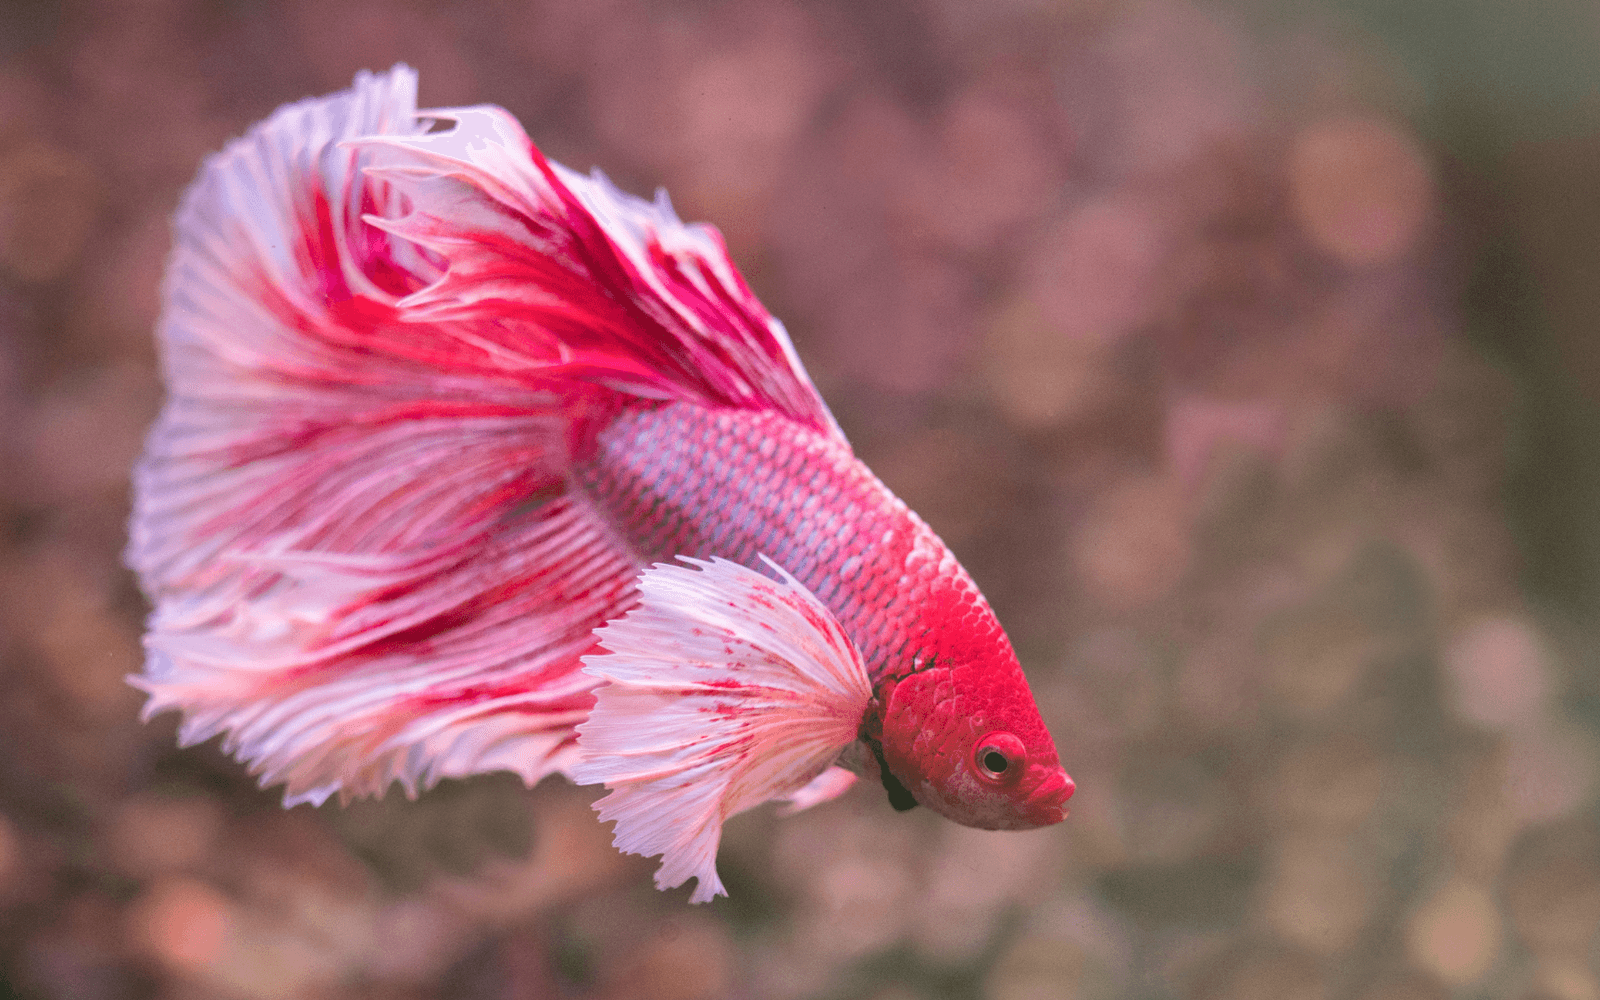 A red betta with a flowing tail